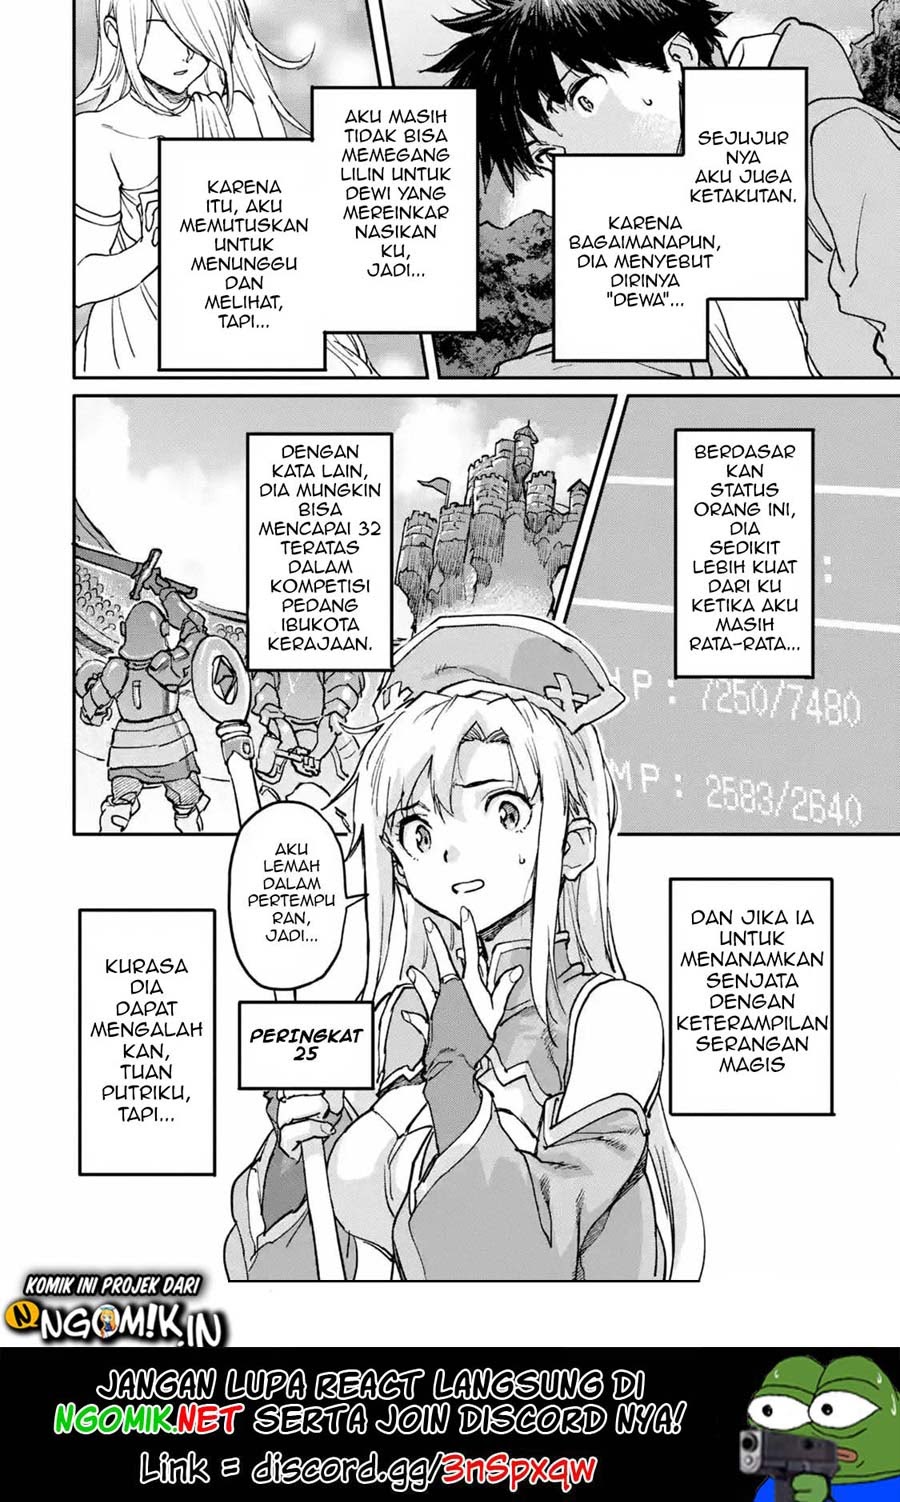 The Hero Who Returned Remains the Strongest in the Modern World Chapter 9-2